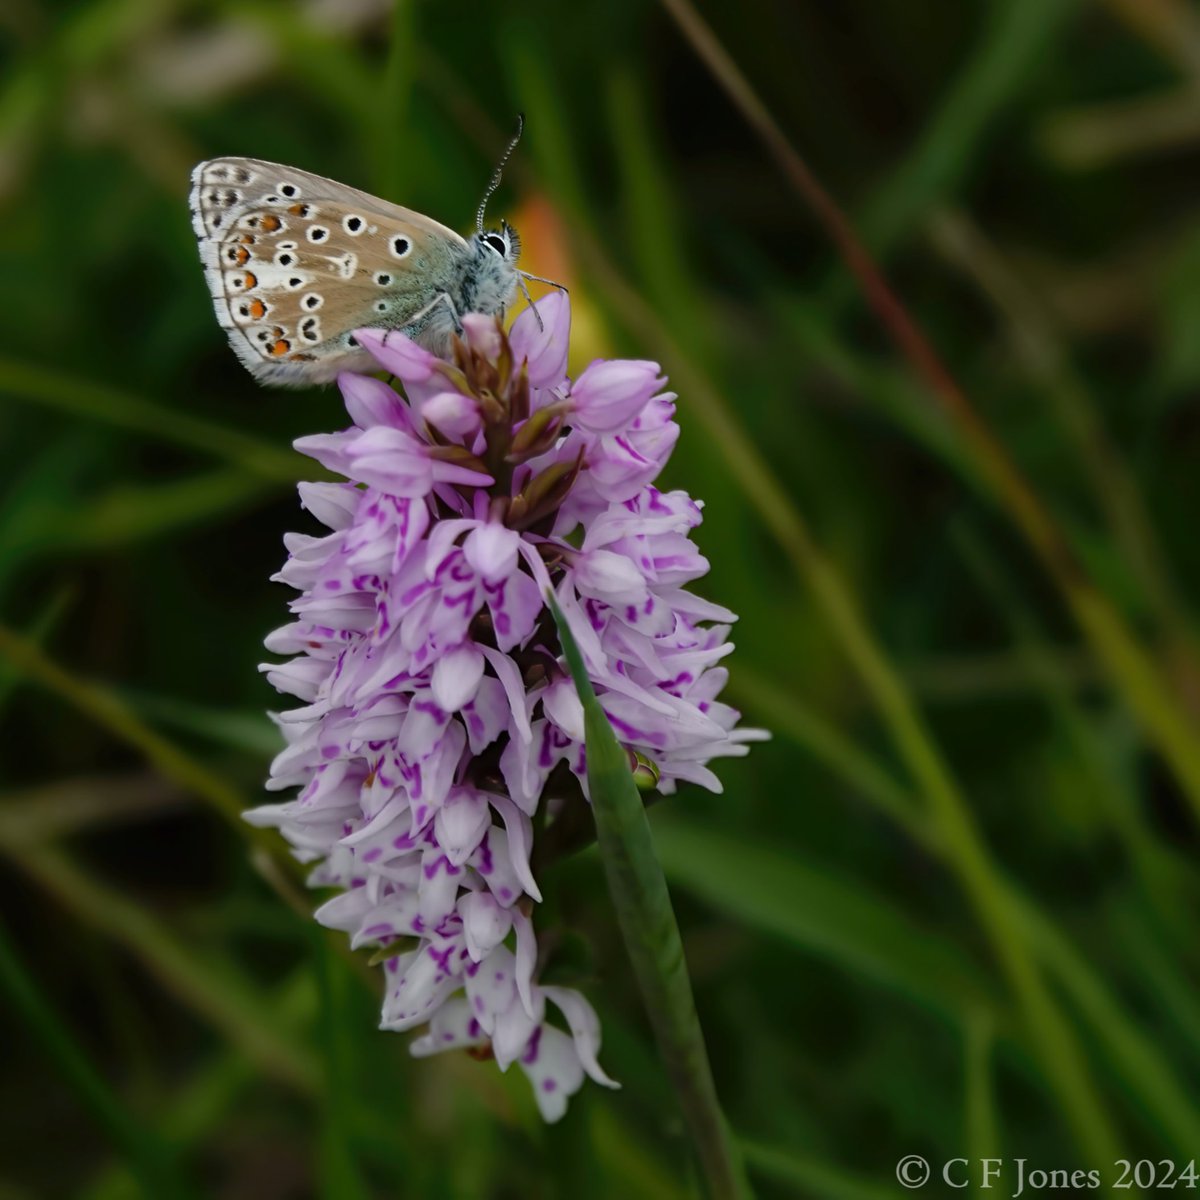 Adonis Blue on Spotted Orchid. Prestbury Hill, Gloucs 20/5/24
@BC_Glos @BC_WestMids @savebutterflies